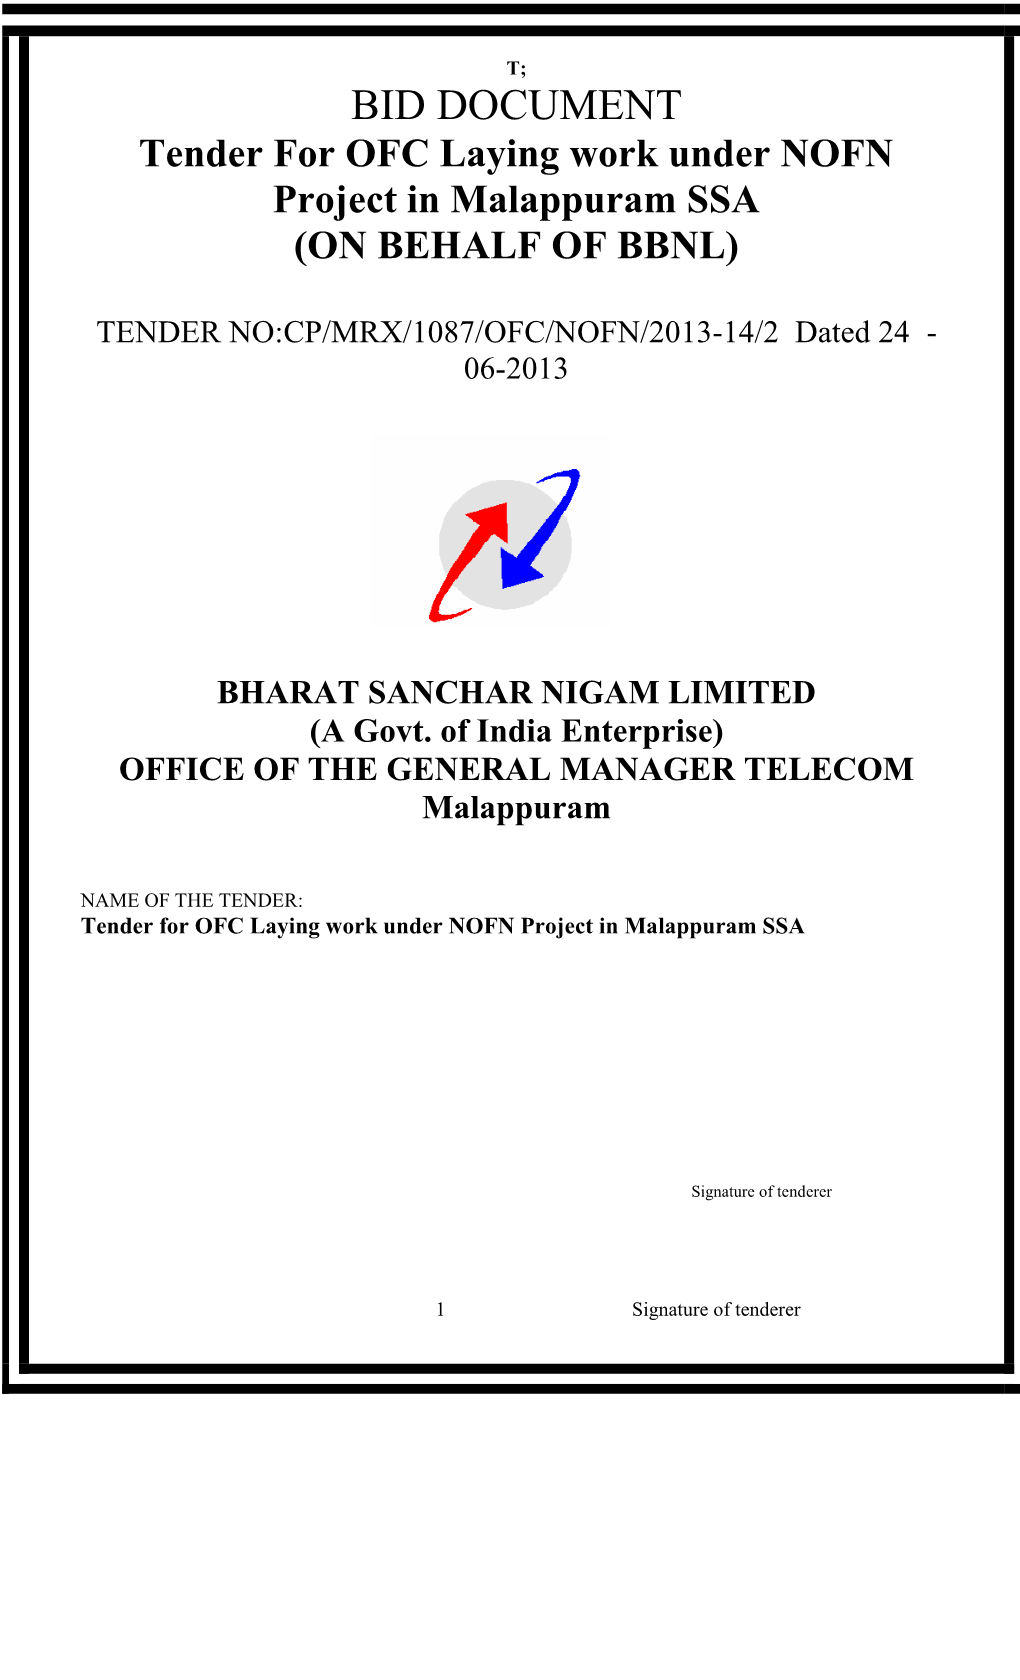 BID DOCUMENT Tender for OFC Laying Work Under NOFN Project in Malappuram SSA (ON BEHALF of BBNL)